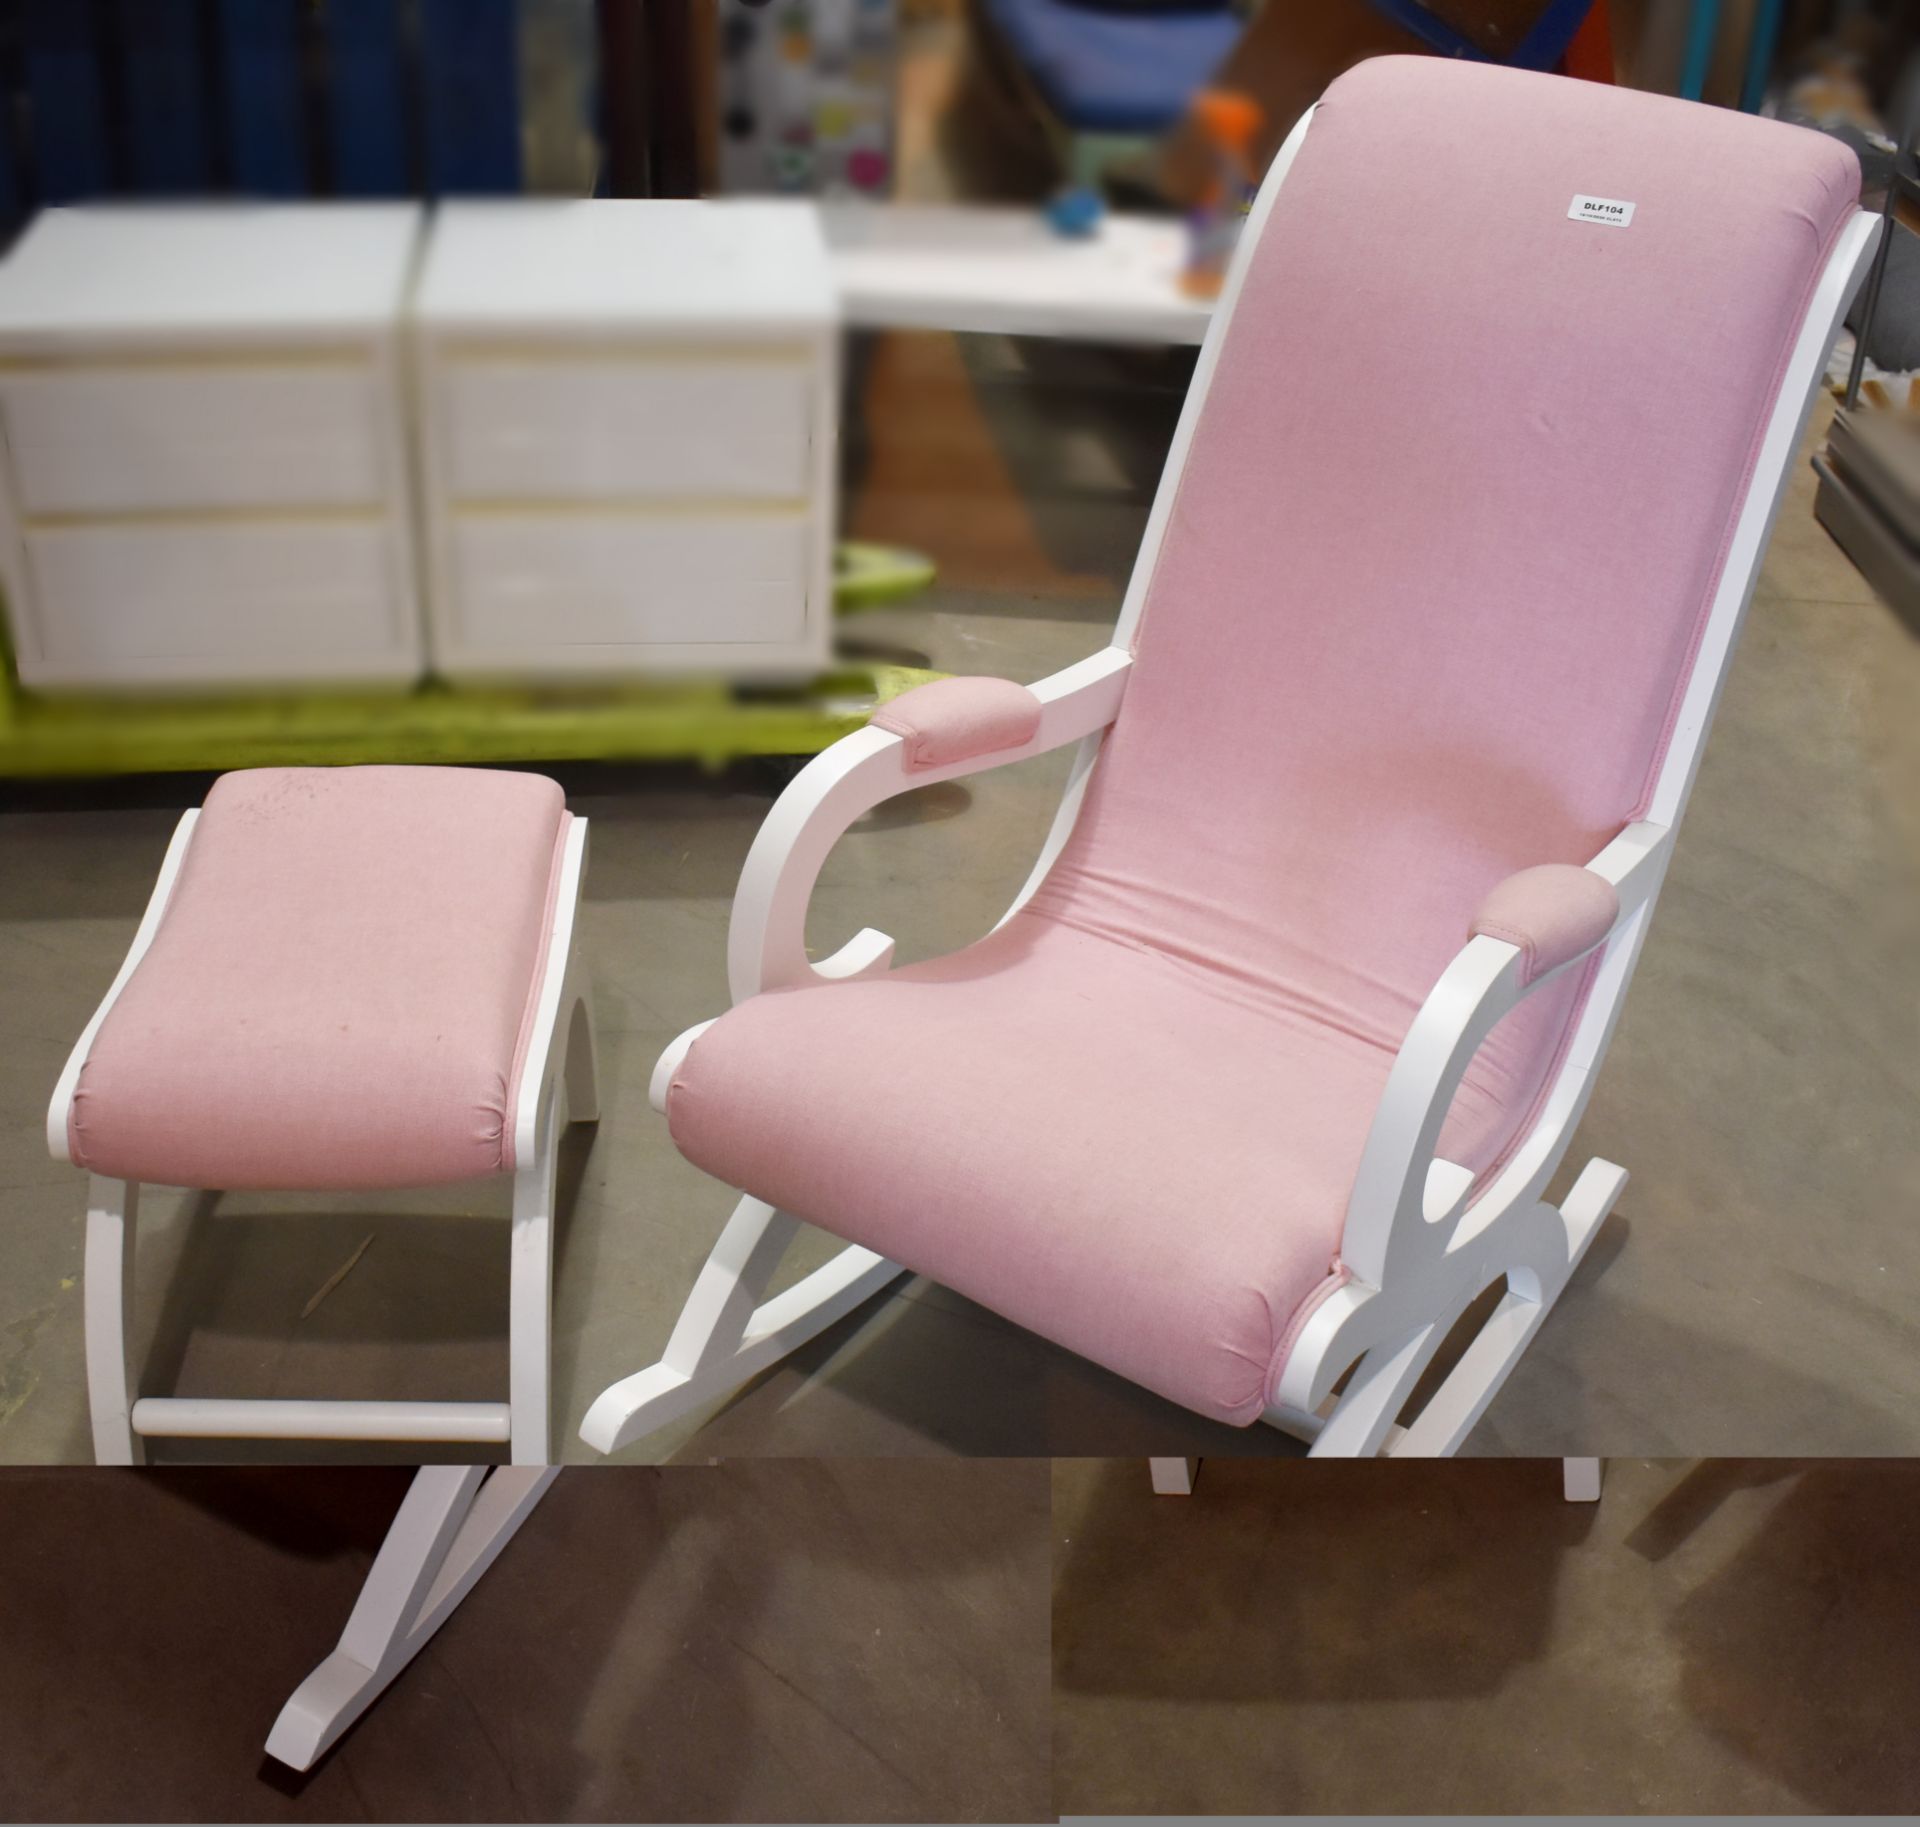 1 x Mother and Baby Rocking Chair With Footstool - Pink Upholstery and White Frame - Size W60 x D110